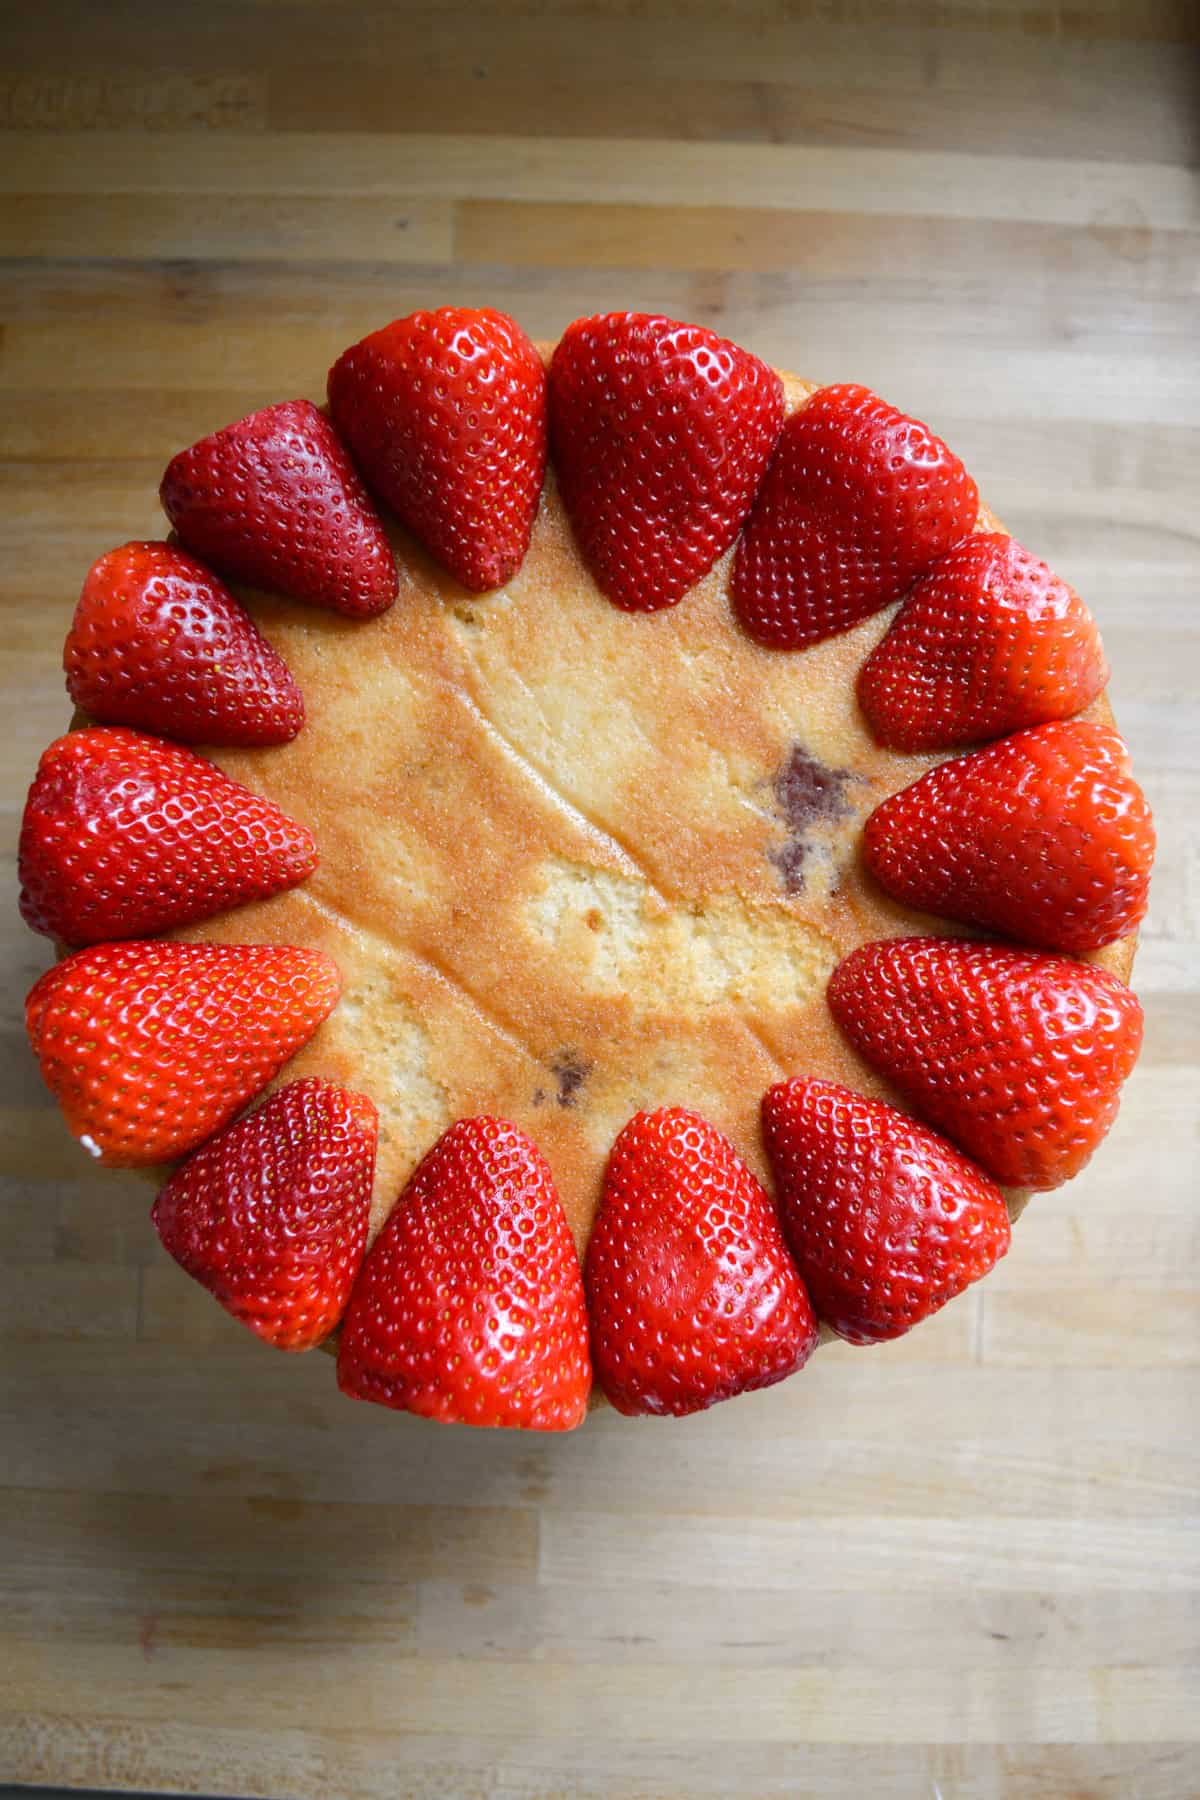 Cake layer upside down on a cake board with halved strawberries lining the perimeter of the cake.